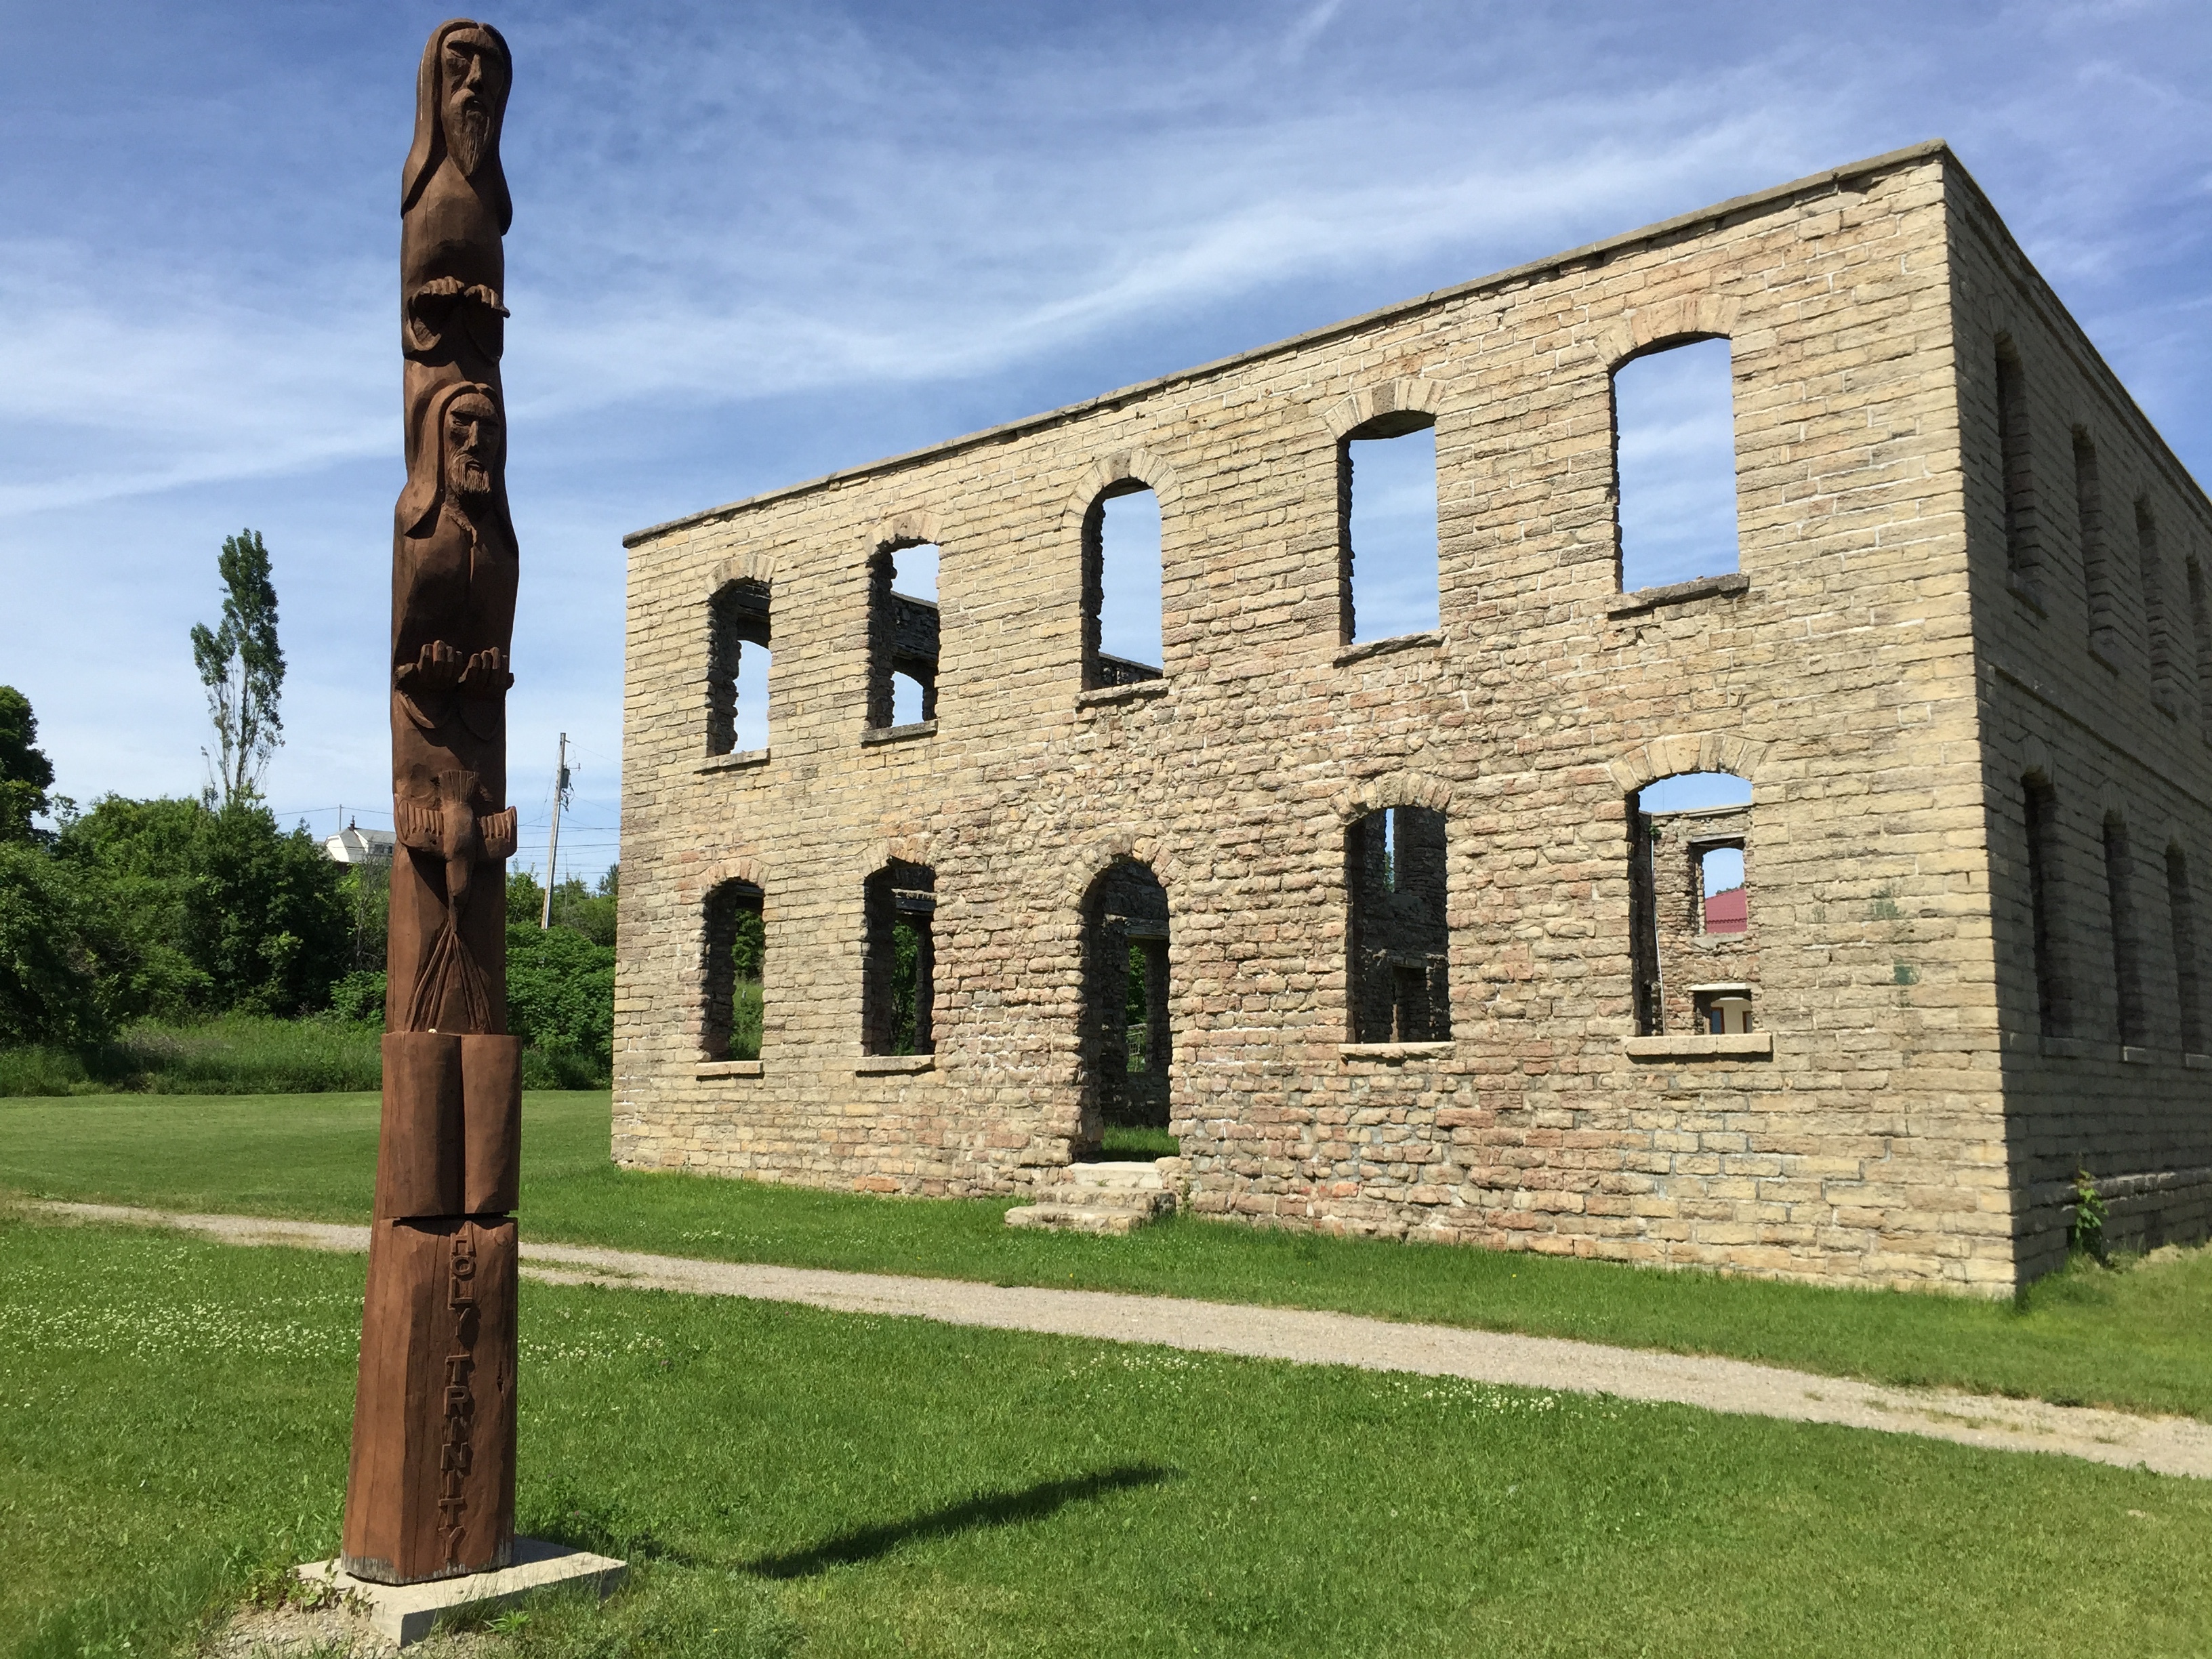 From Powwows to Porcupine Quills – A Cultural Itinerary